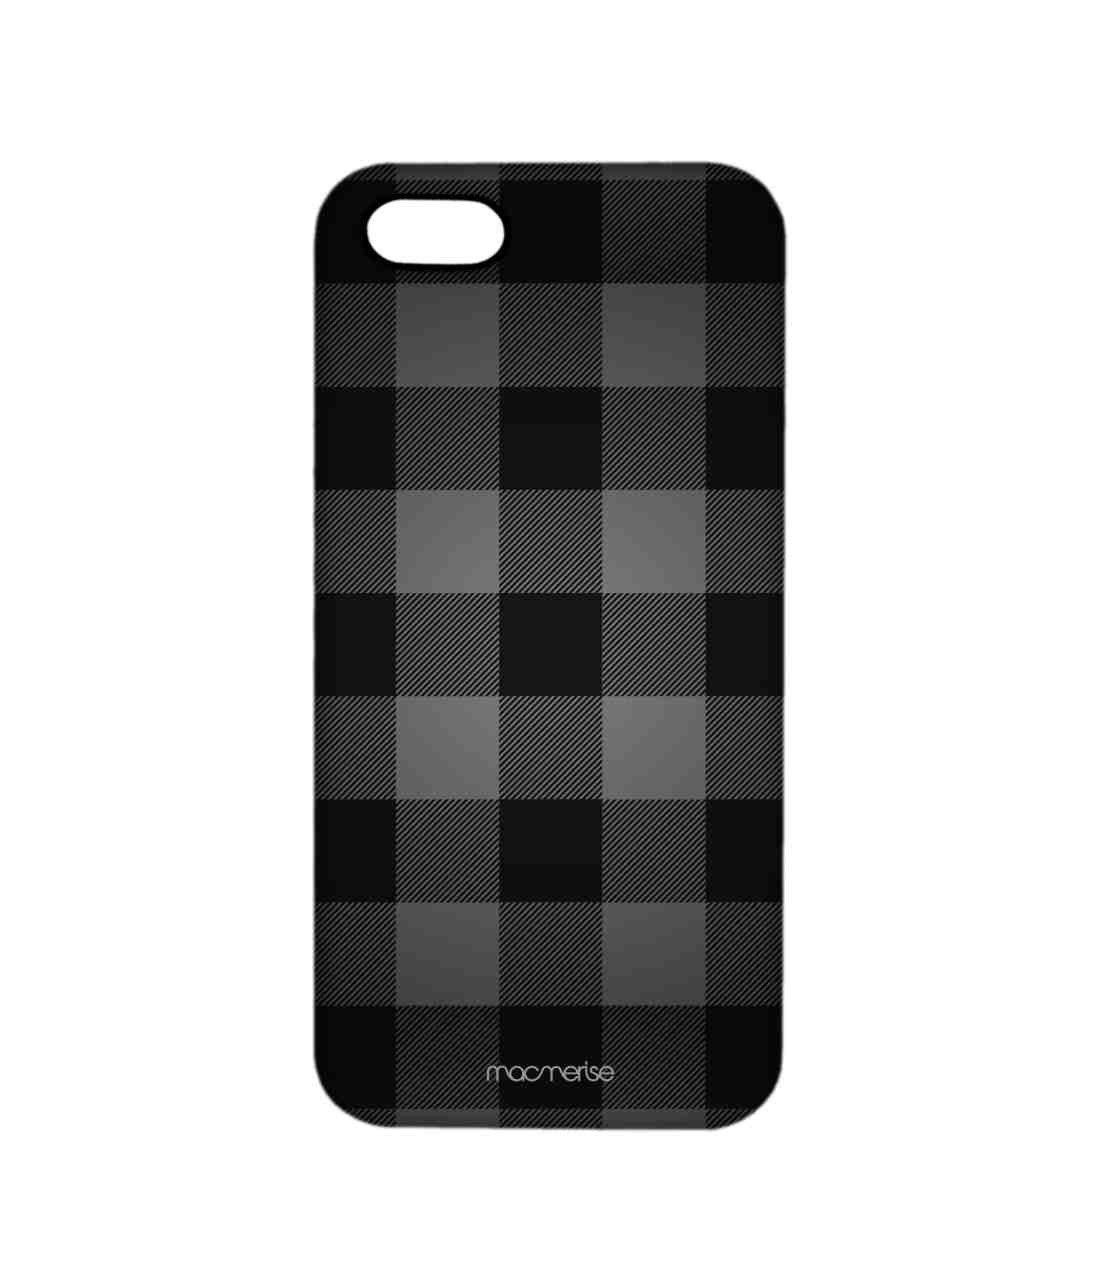 Checkmate Black - Sleek Phone Case for iPhone 5/5S